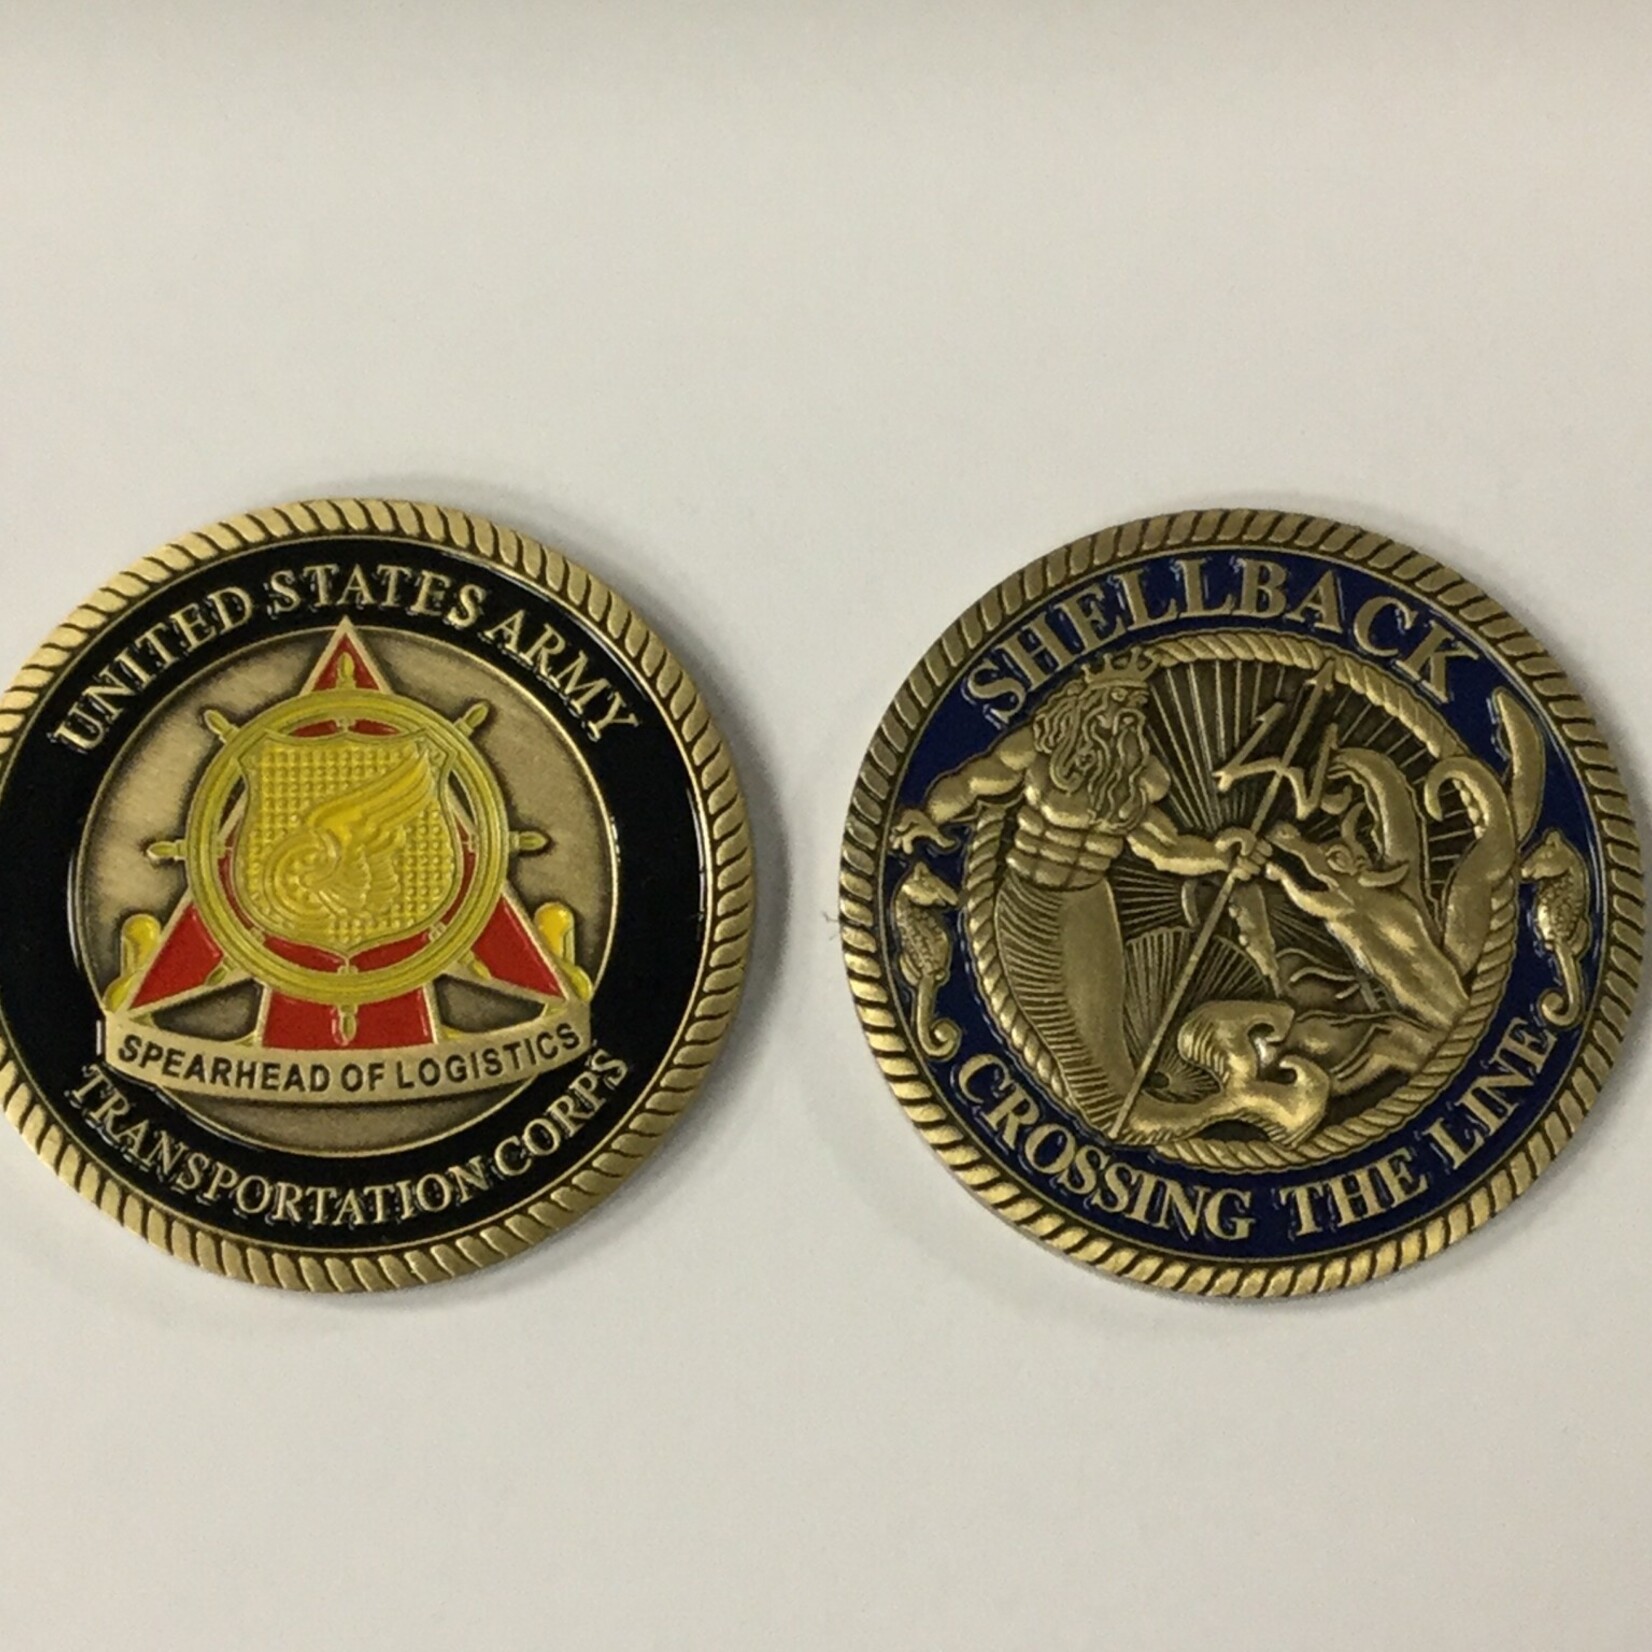 SHELLBACK/CROSSING THE LINE COIN